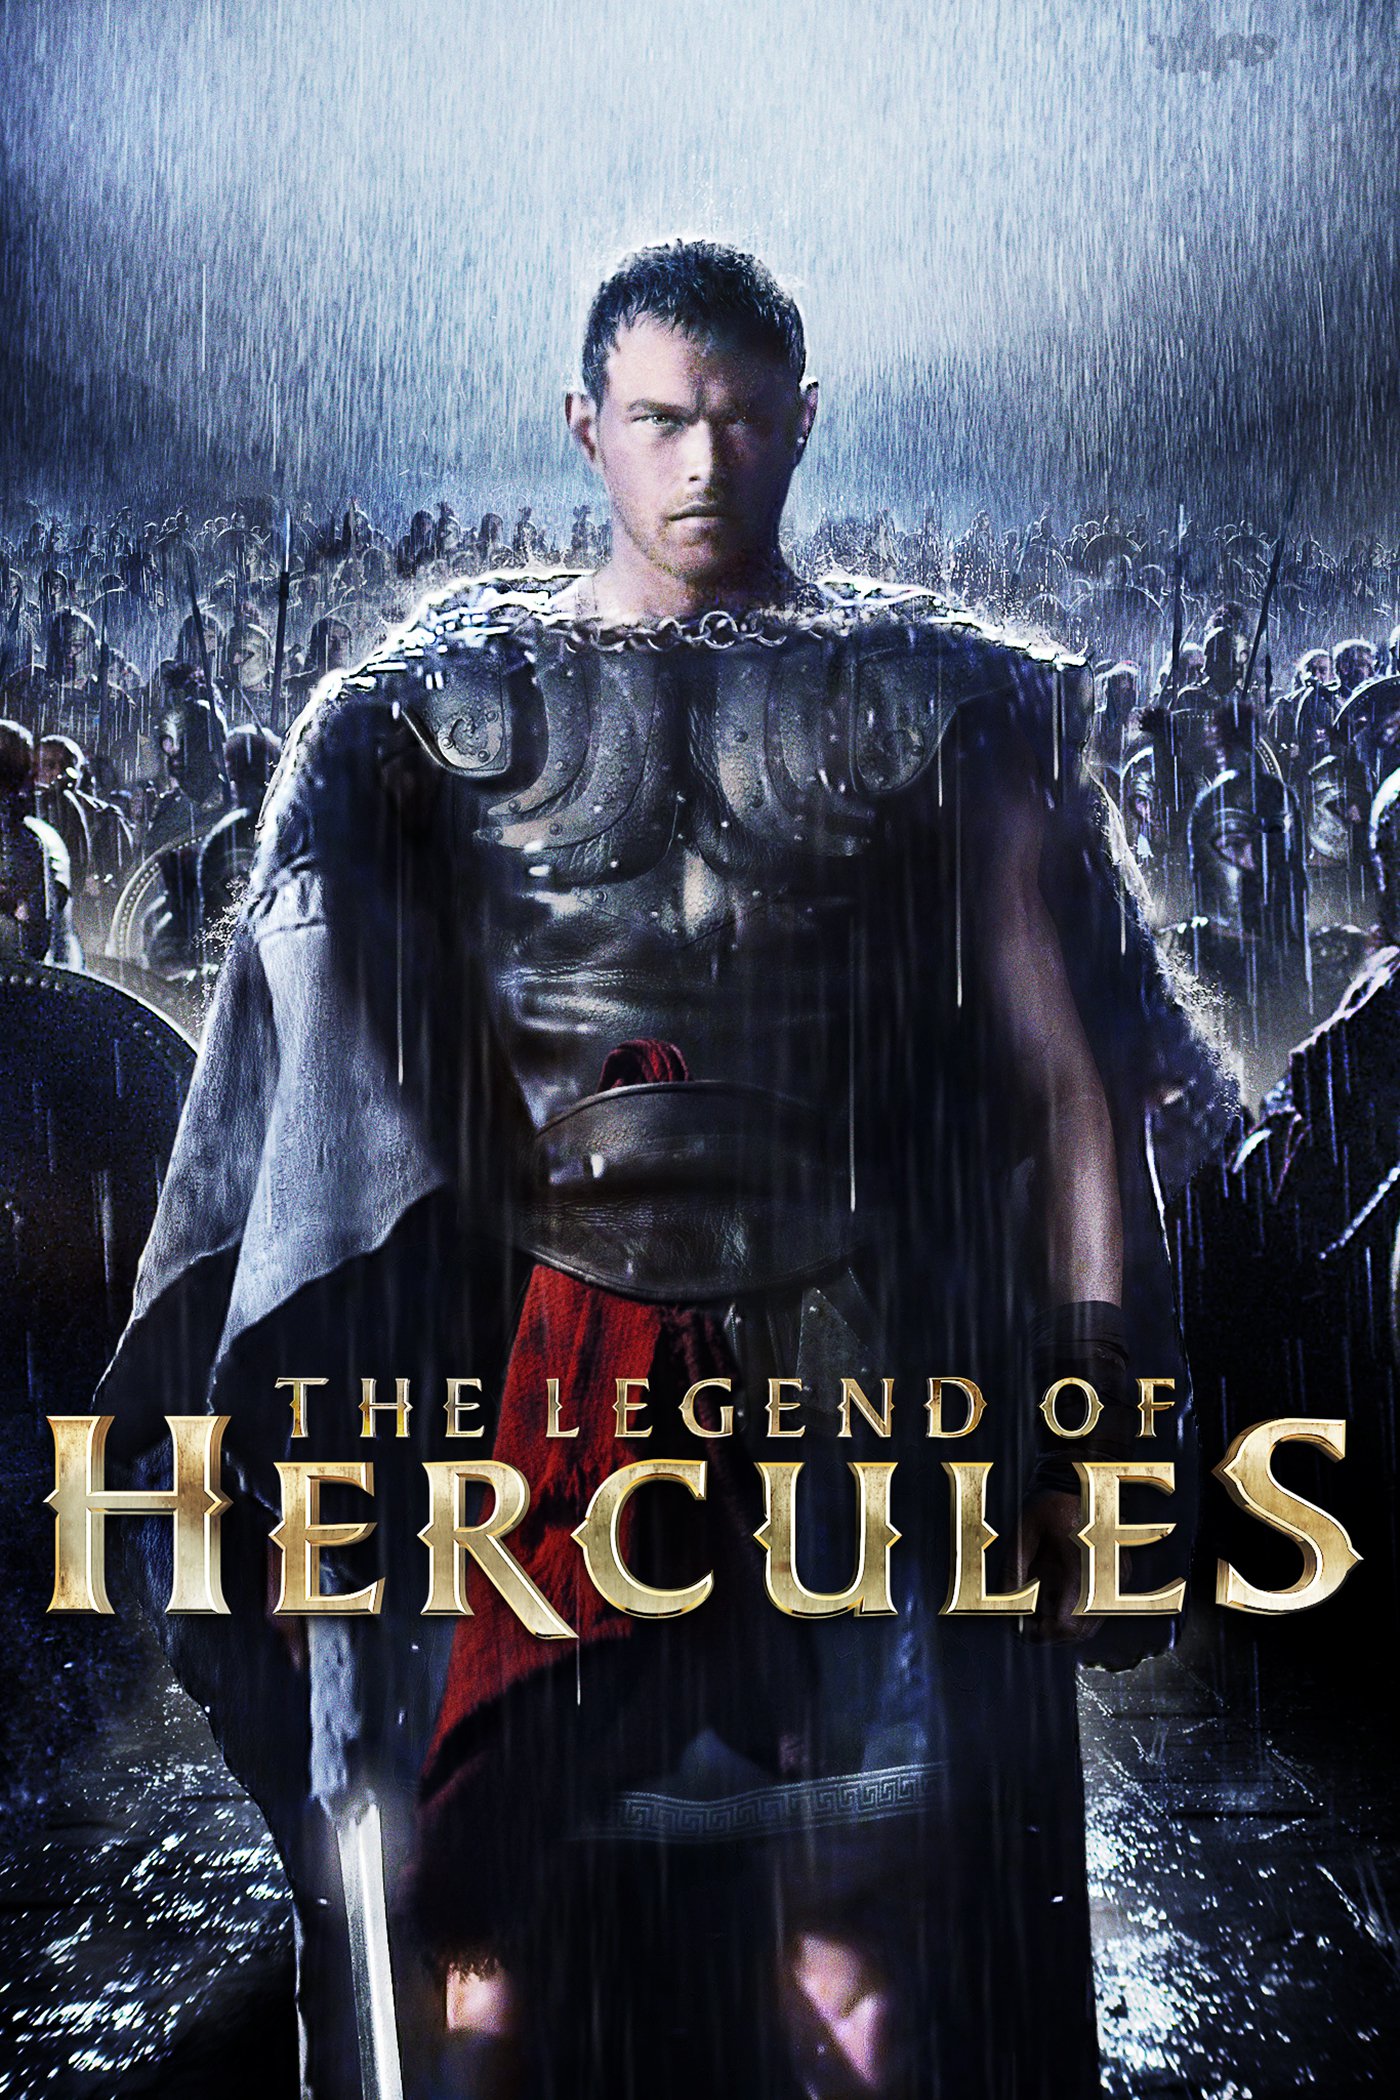 Poster for the movie "The Legend of Hercules"